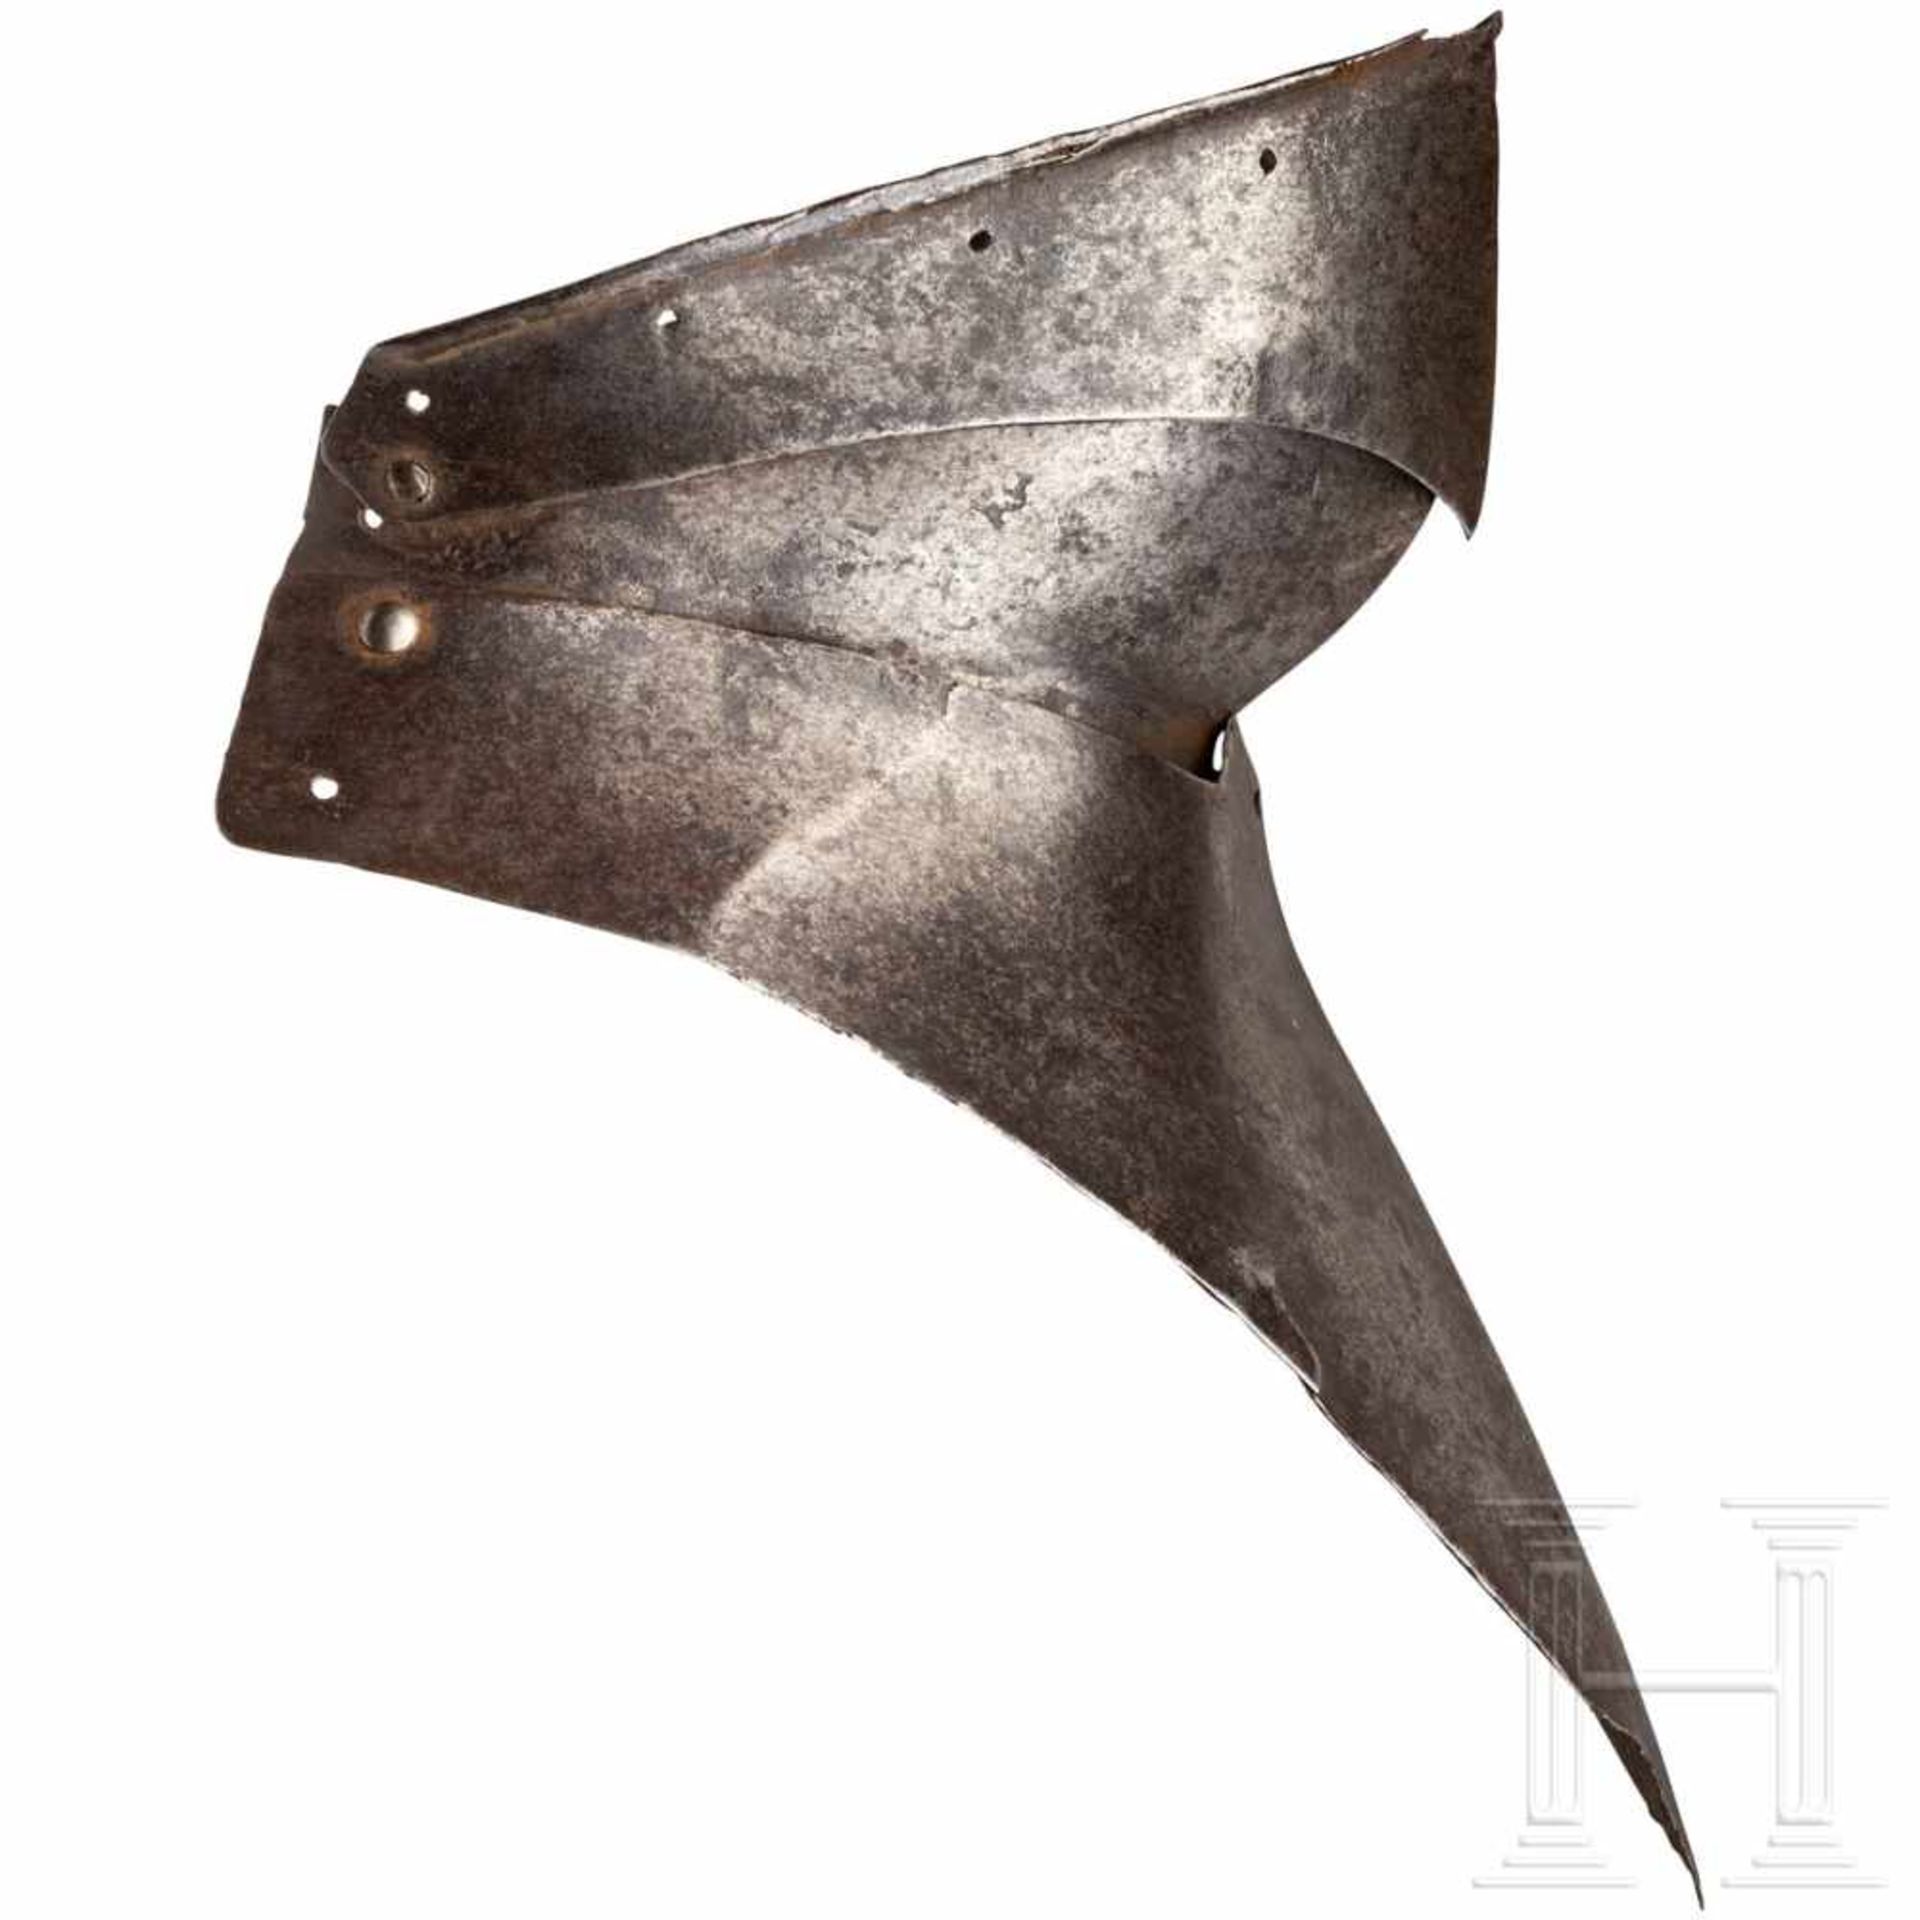 A Spanish late-Gothic reinforcing bevor, circa 1510The ridged, pivoted face guard forged in two